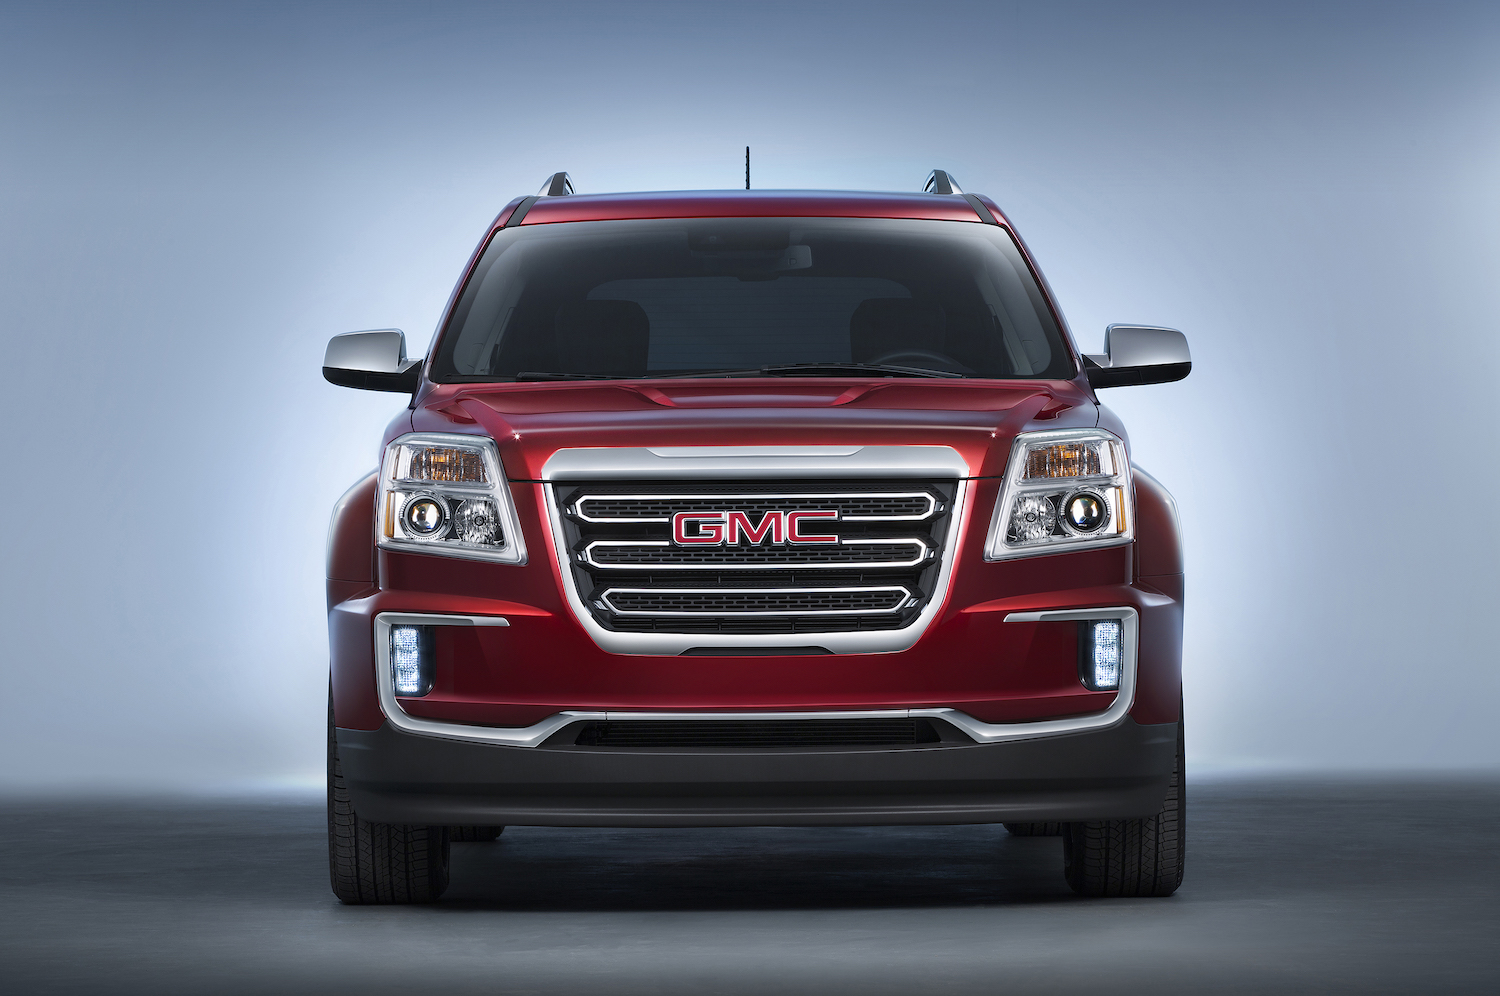 Publicity photo of the large, chrome grille of a red GMC Terrain crossover SUV parked in a studio, a white background behind it.